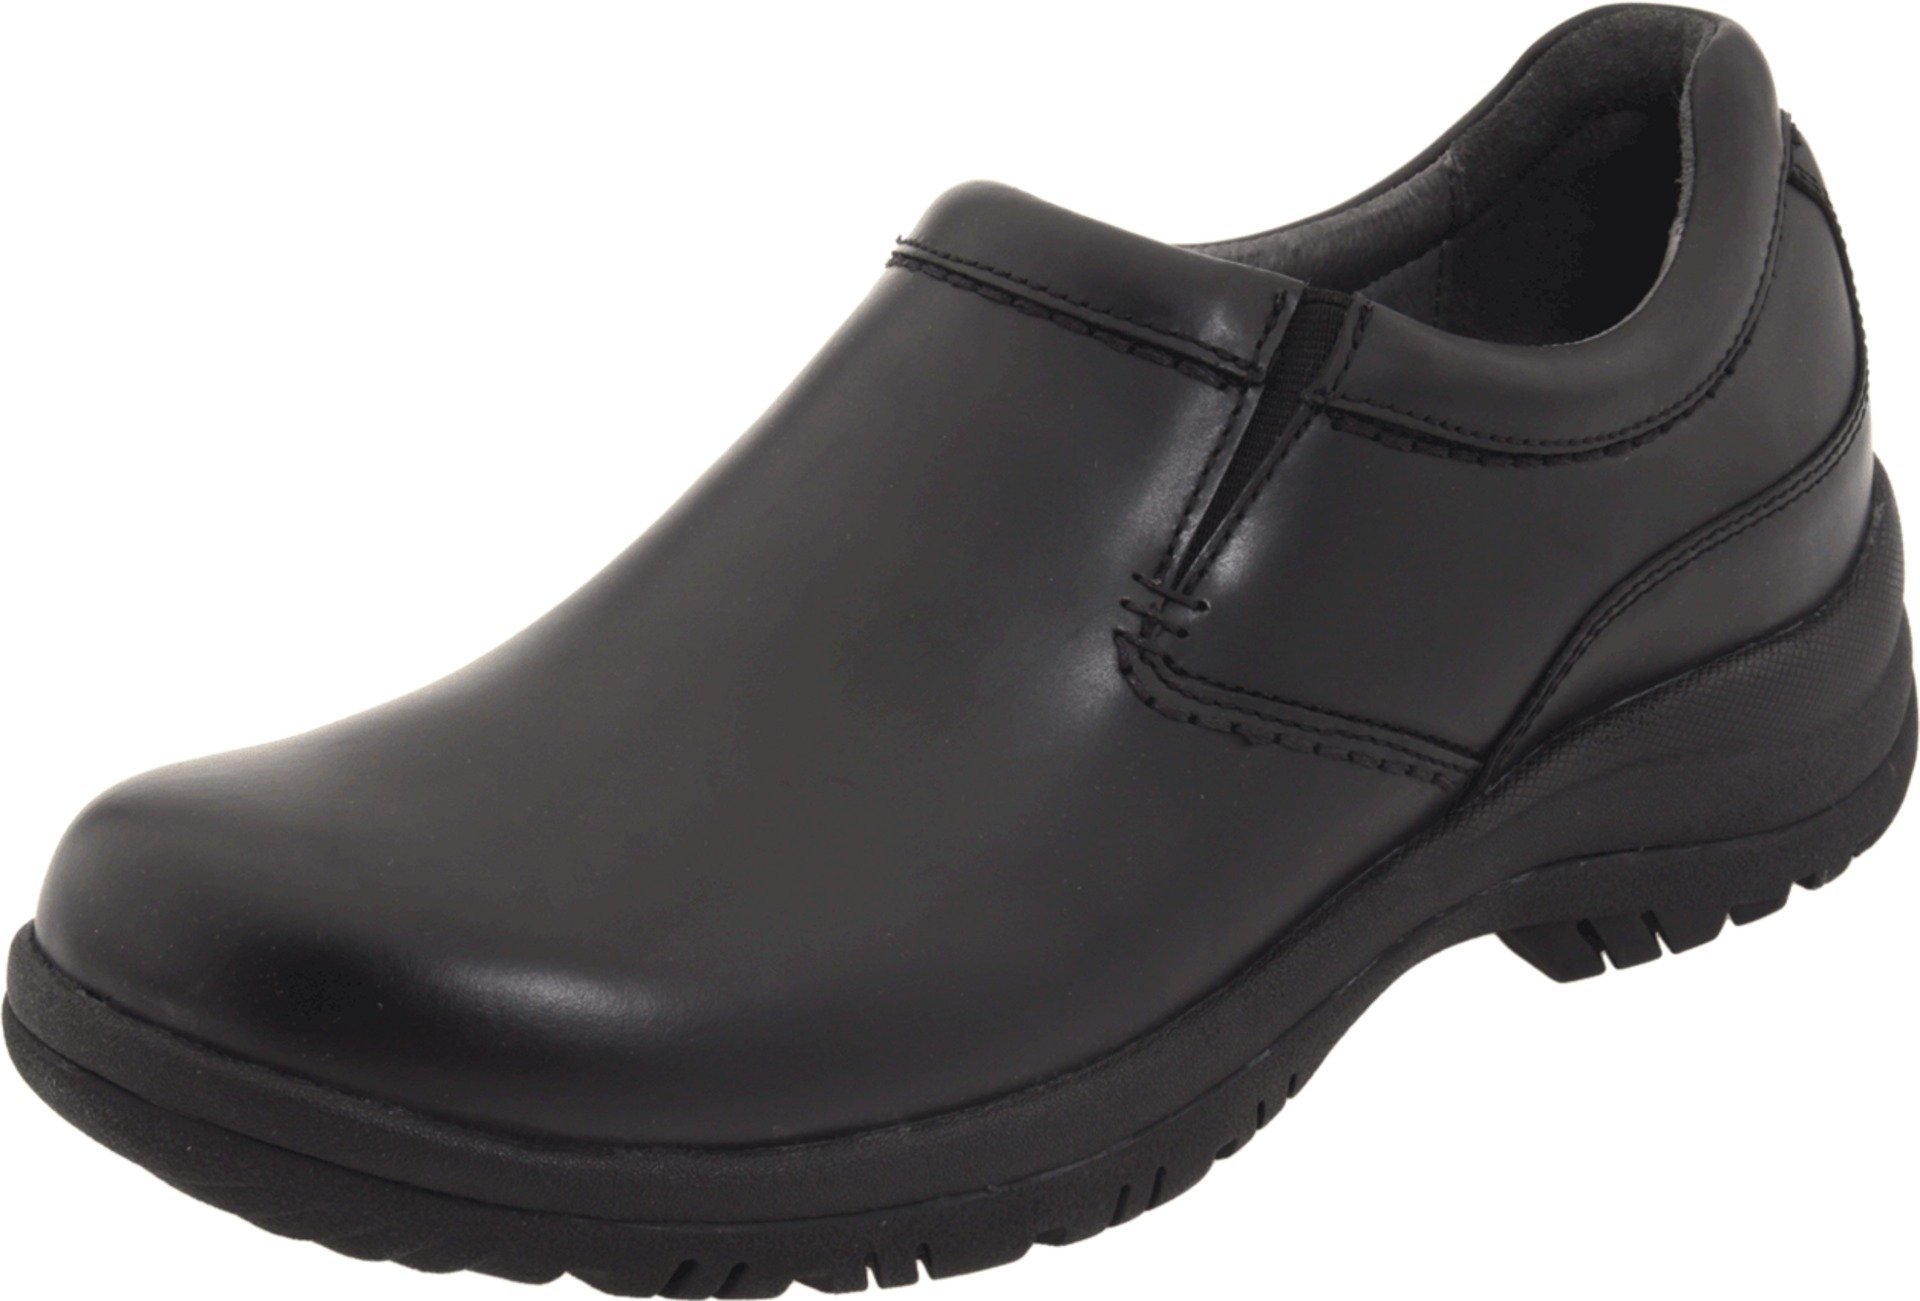 Dansko Men's Wynn Casual Shoes - Work Shoes, Chef Shoes, All Day Comfort and Support